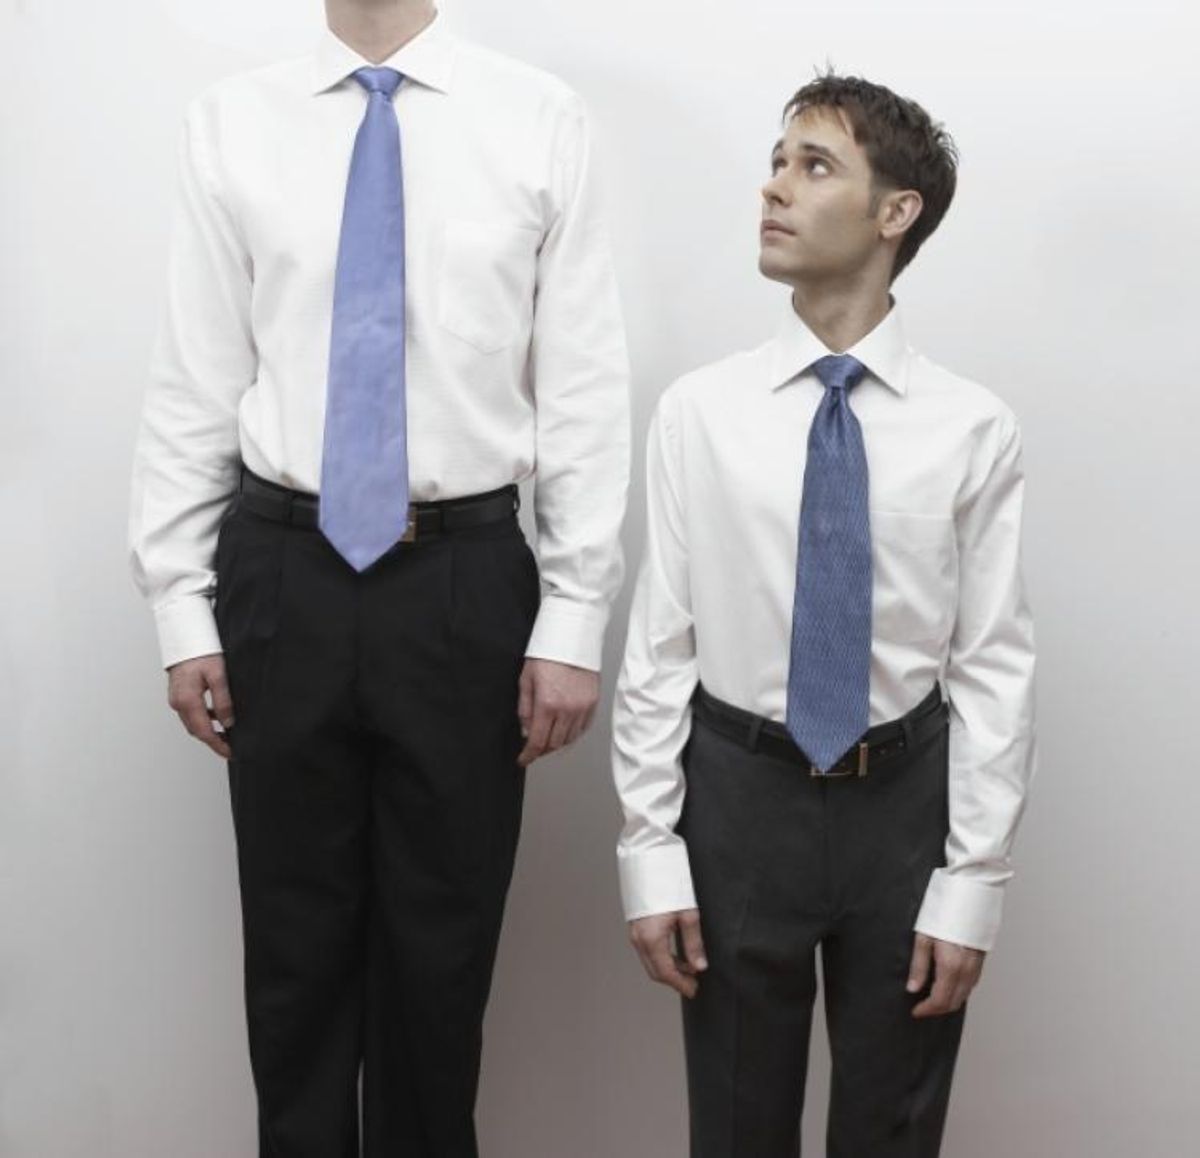 5 Perks Of Being A Tall Person